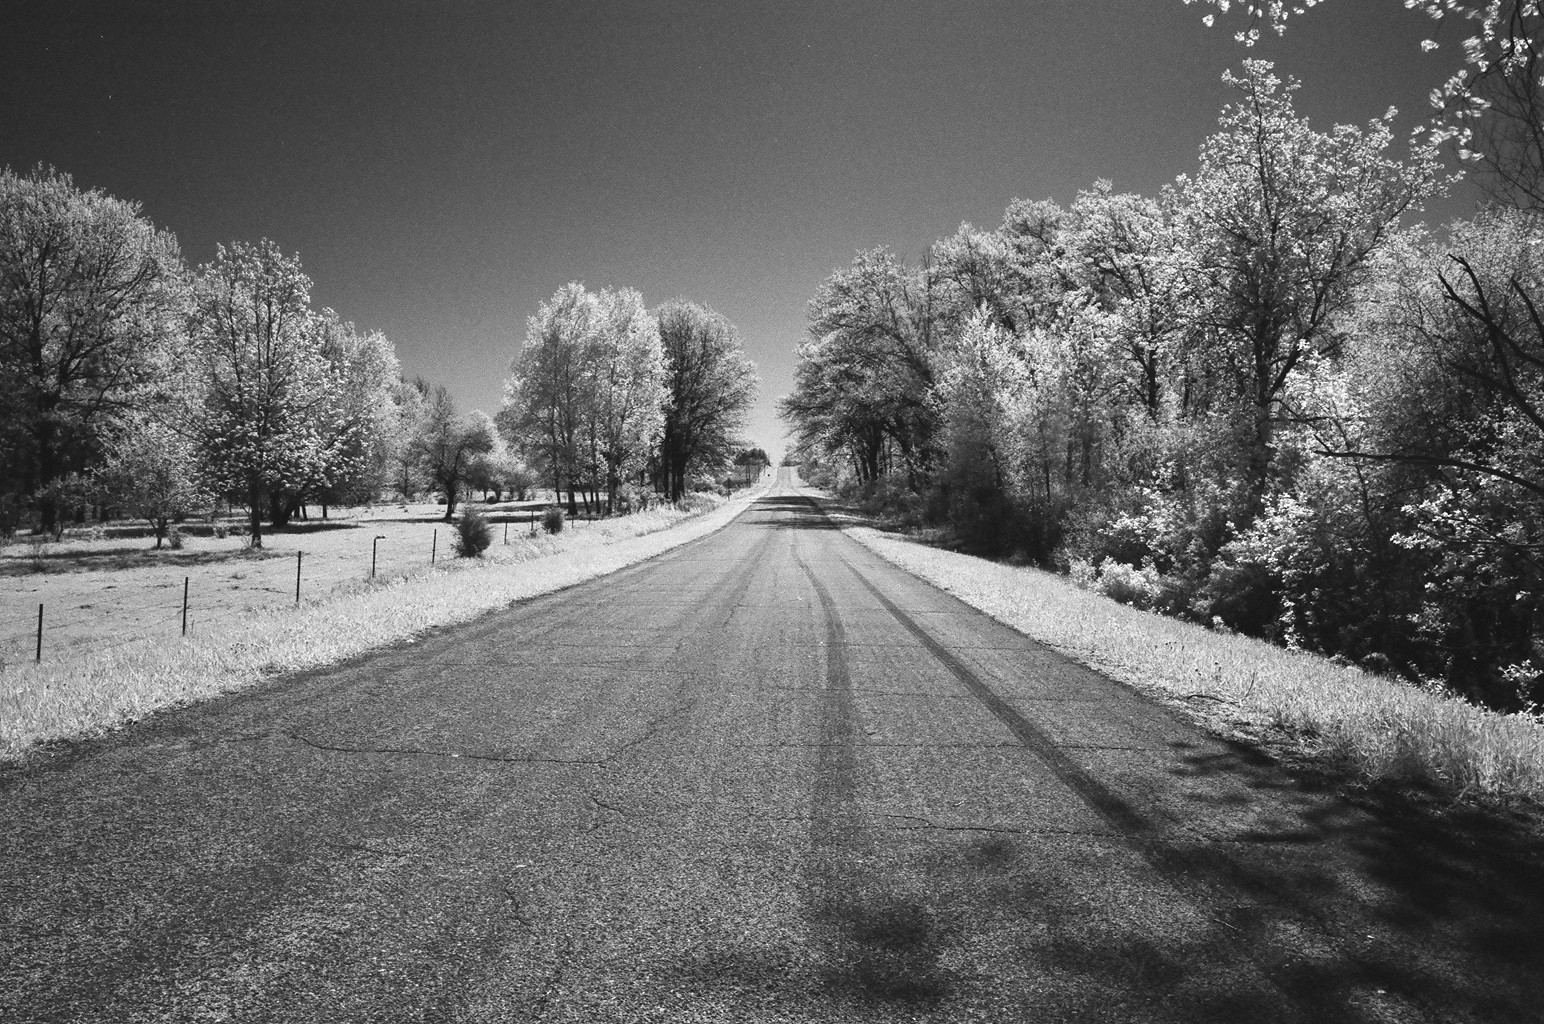 Infrared Film | Central Wisconsin film photographer